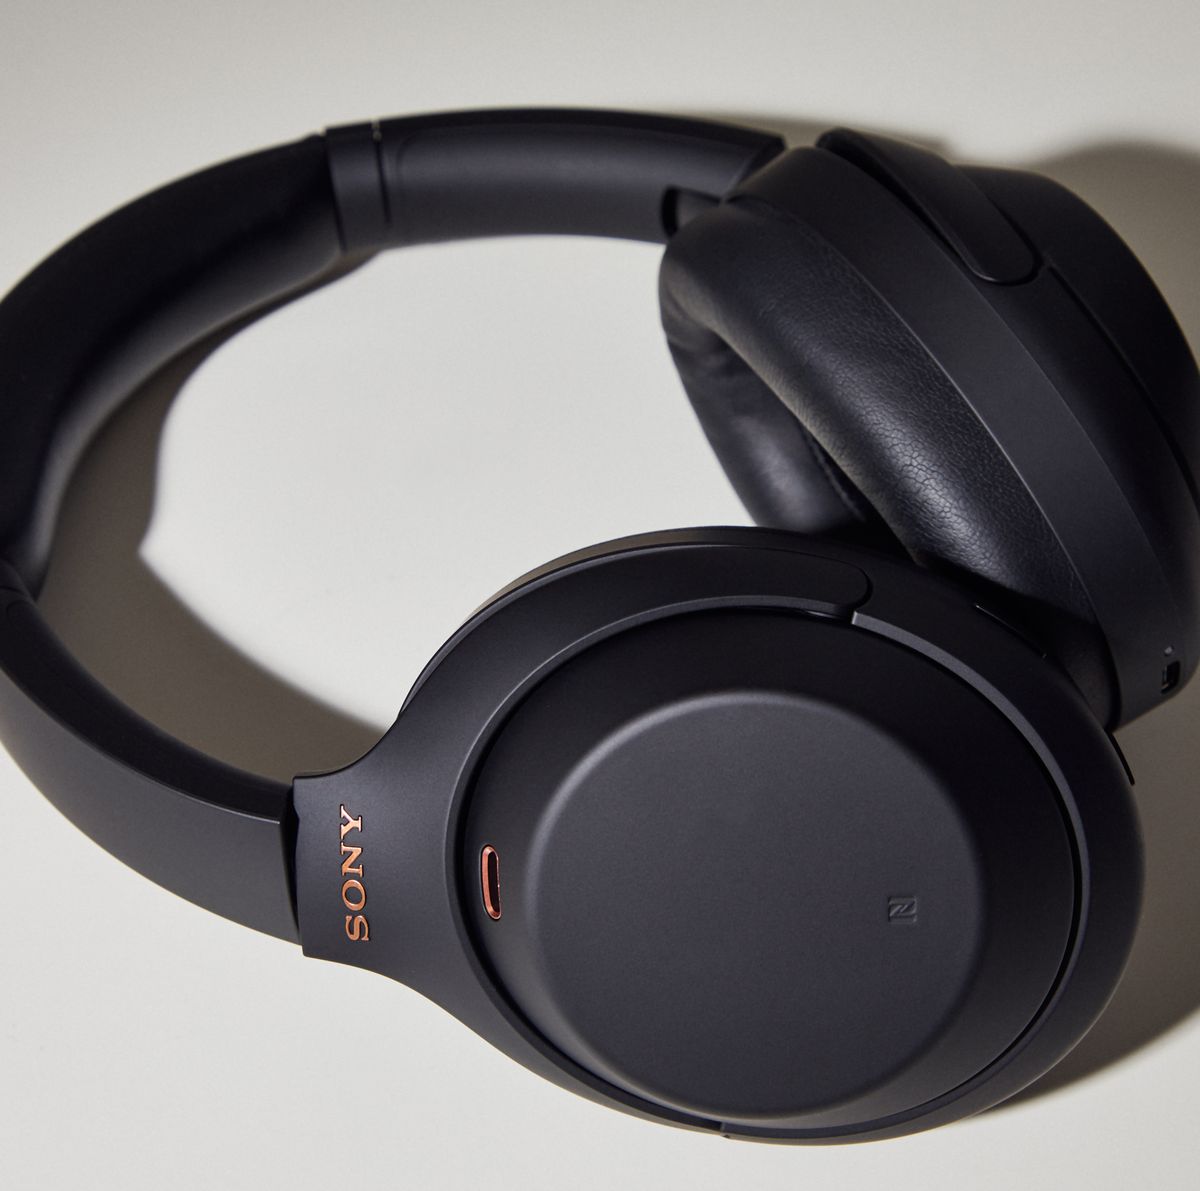 Sony's WH-1000XM4 headphones are great — here's how I made them sound even  better